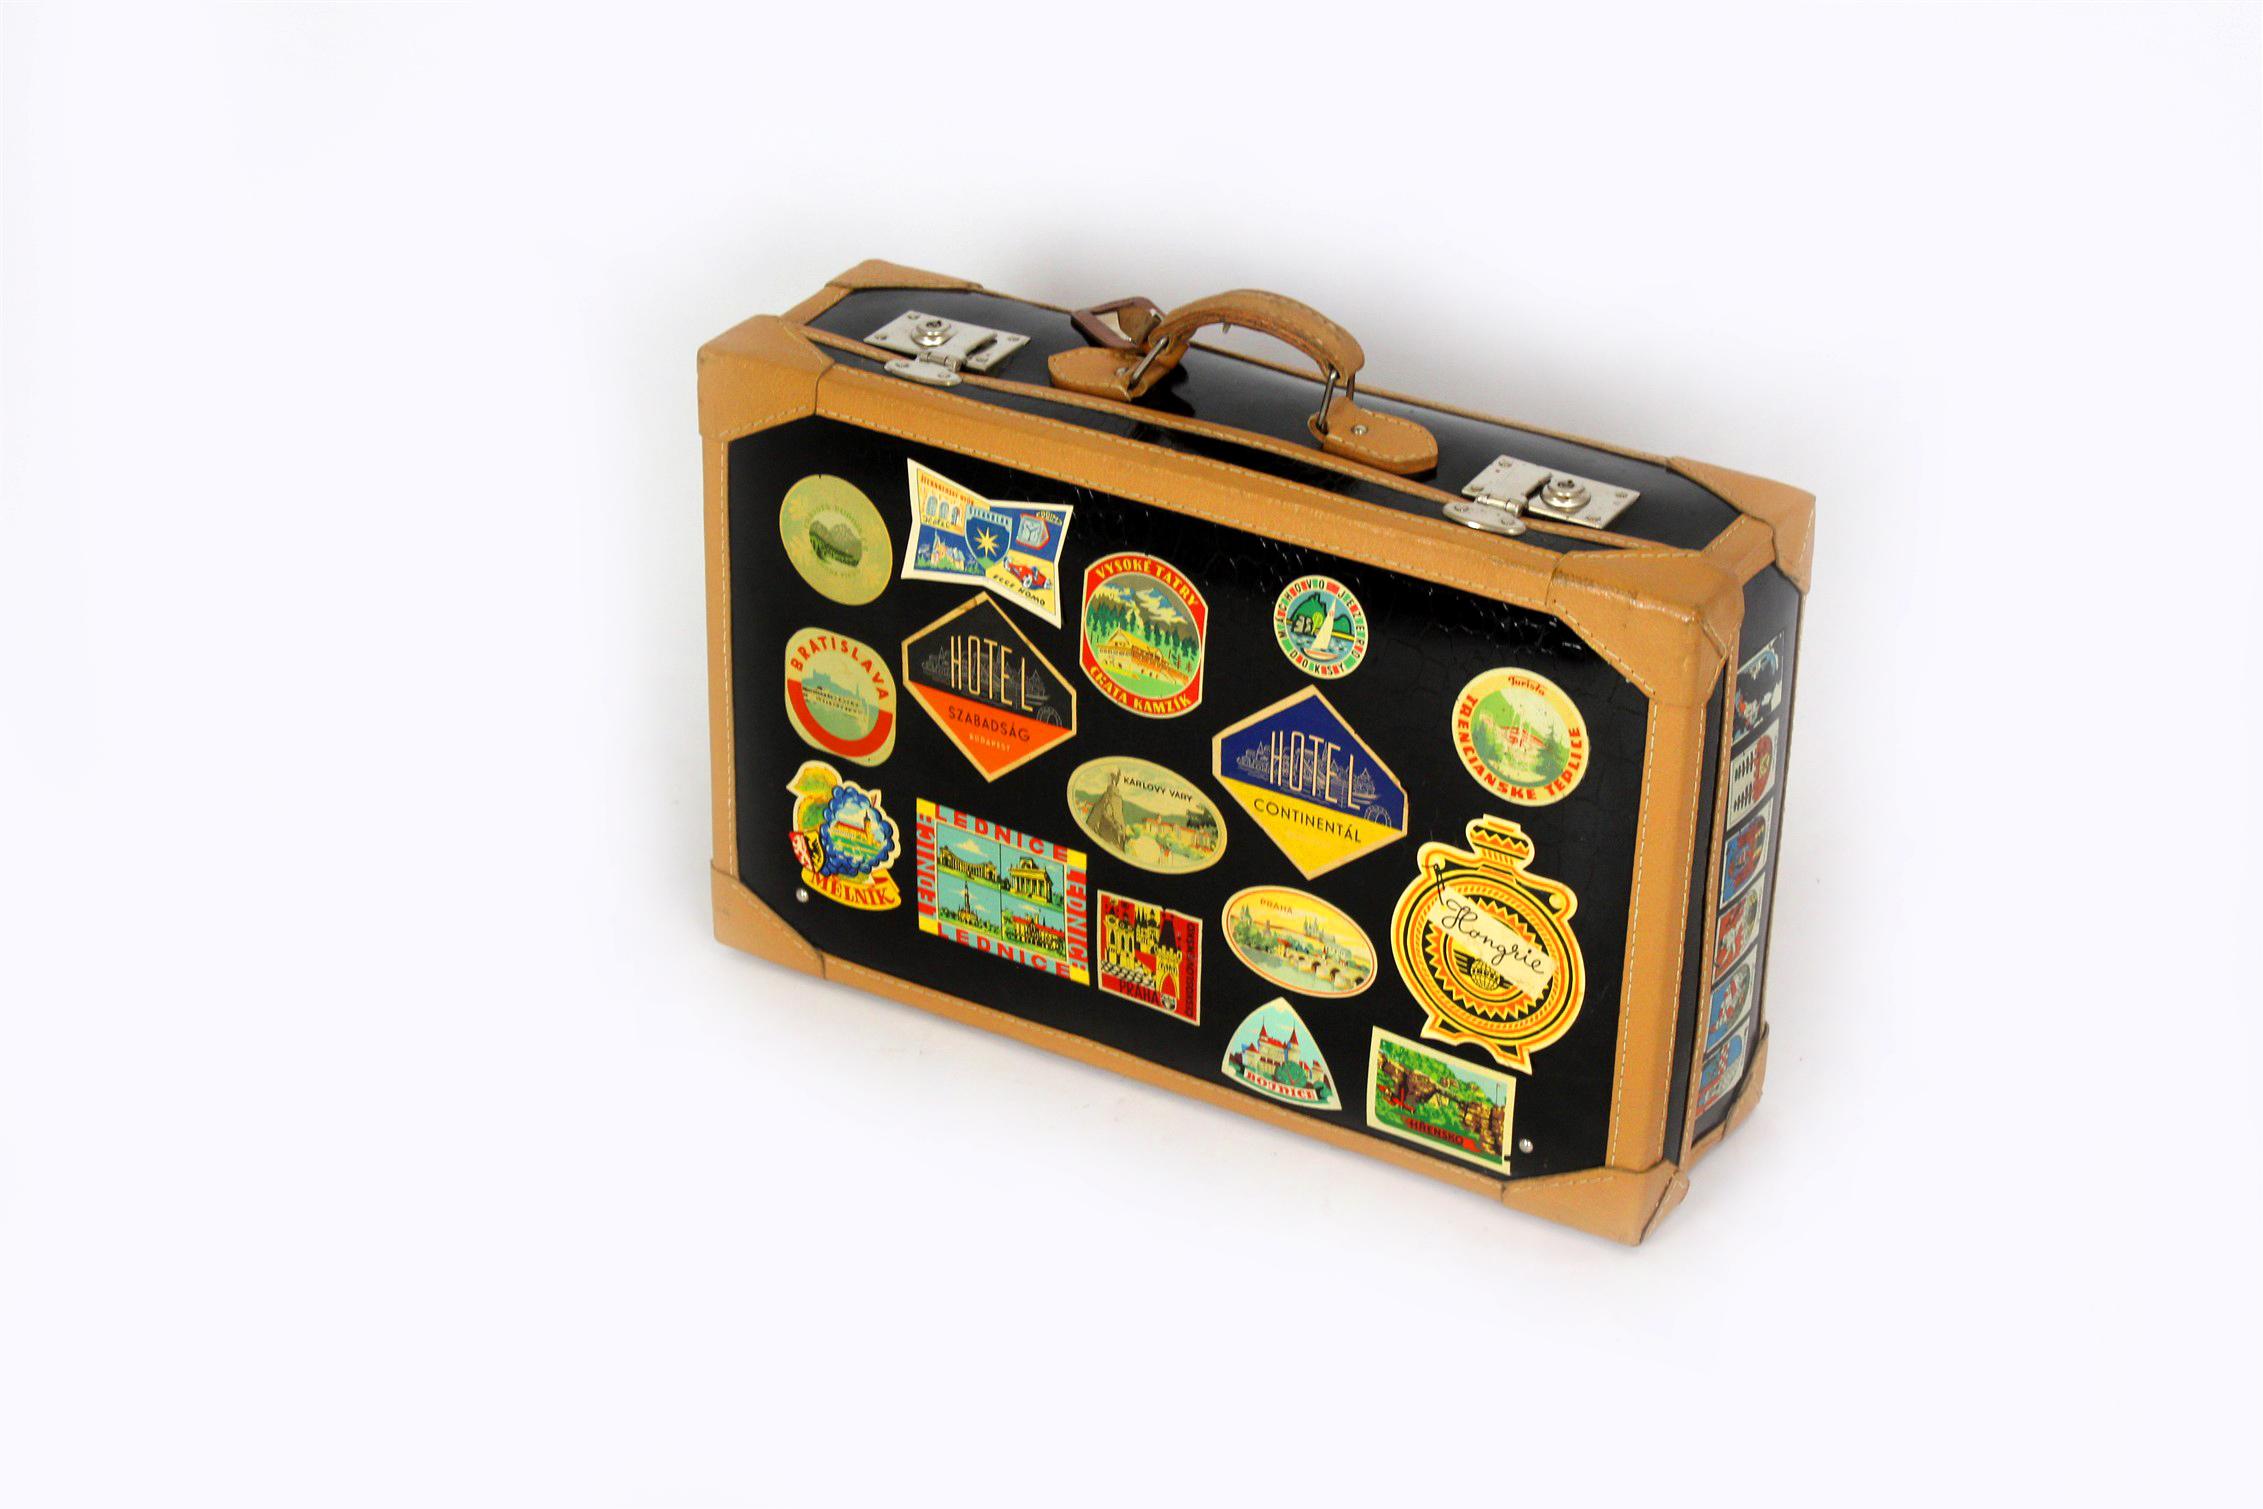 
This leather travel suitcase was produced in the Czech Republic in the 1950s. The suitcase is in very good condition with numerous original stickers, mainly from tourist places in Czechoslovakia.